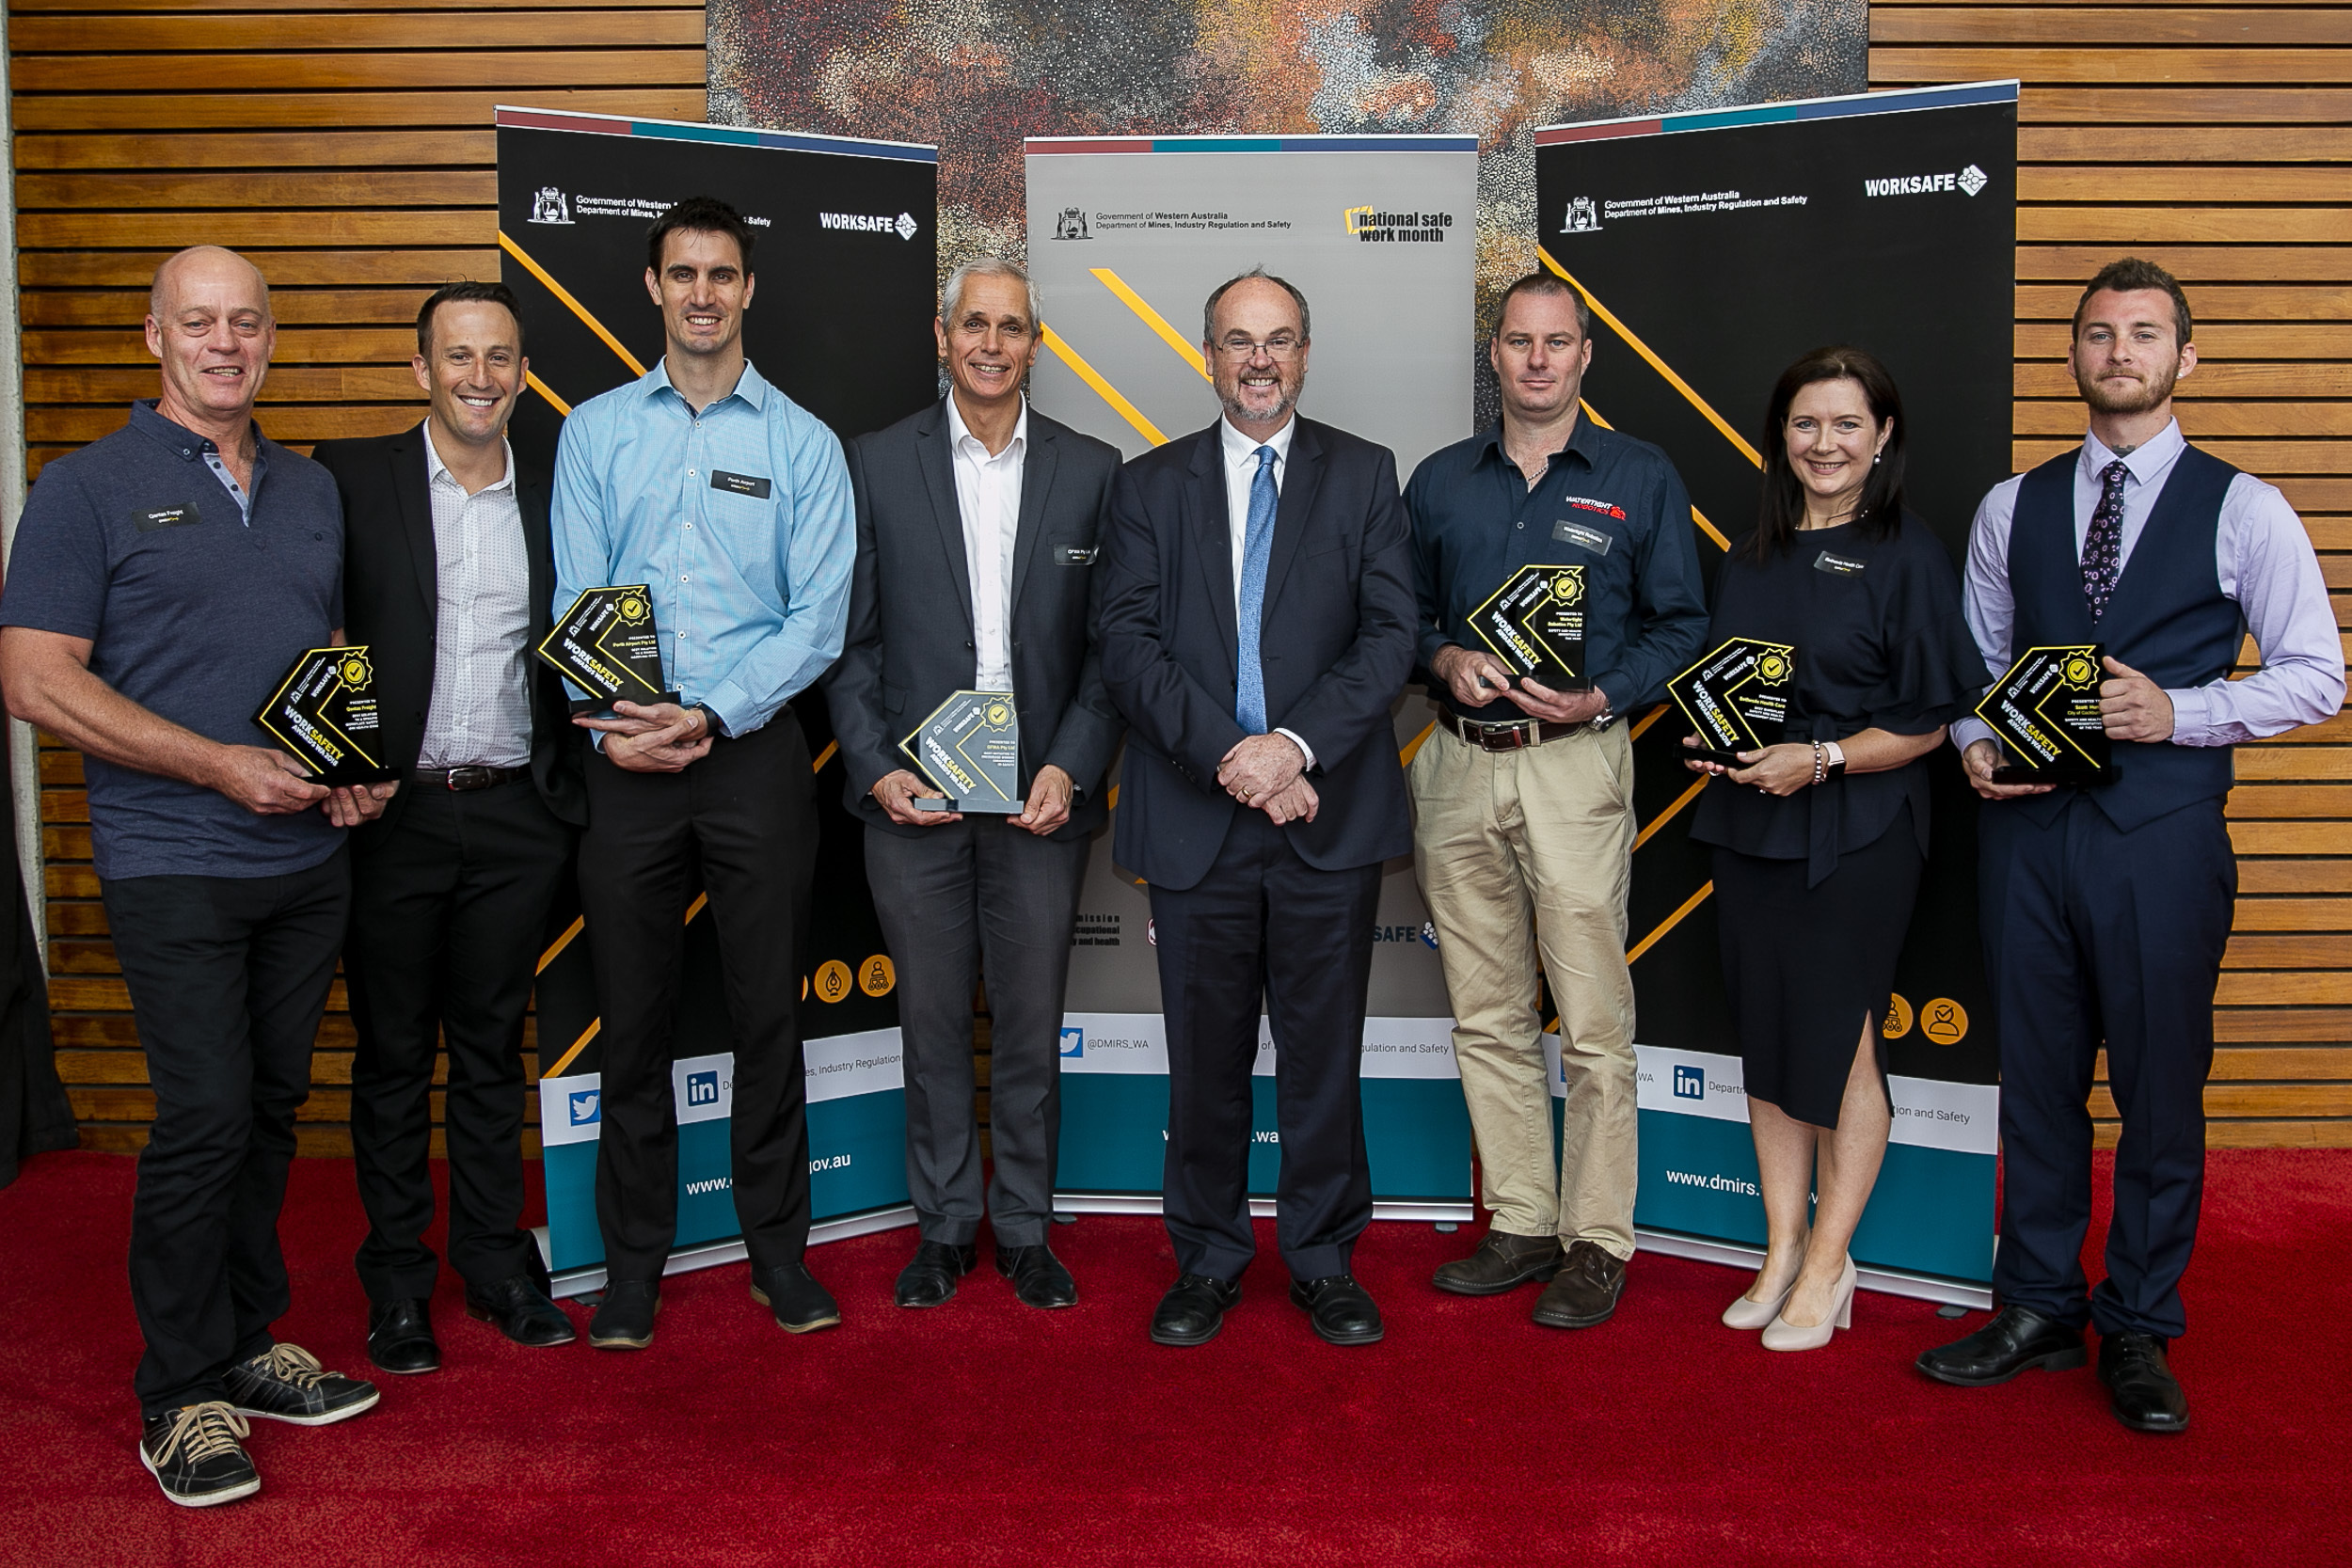 Winners of the Work Safety Awards 2018